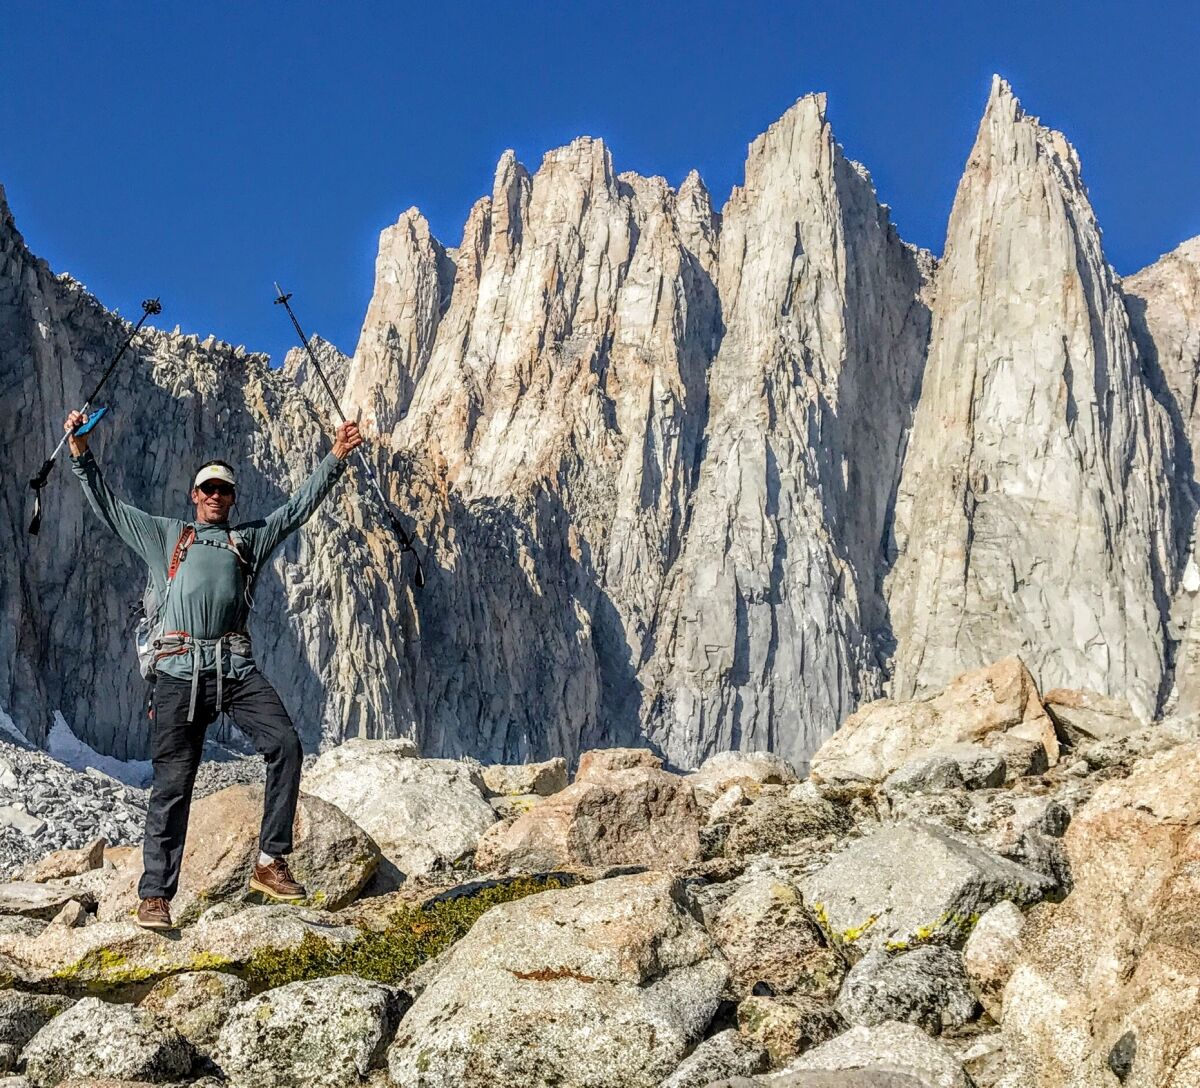 A man holding hiking poles raises his arms in a pose below a large rocky mountain peak.